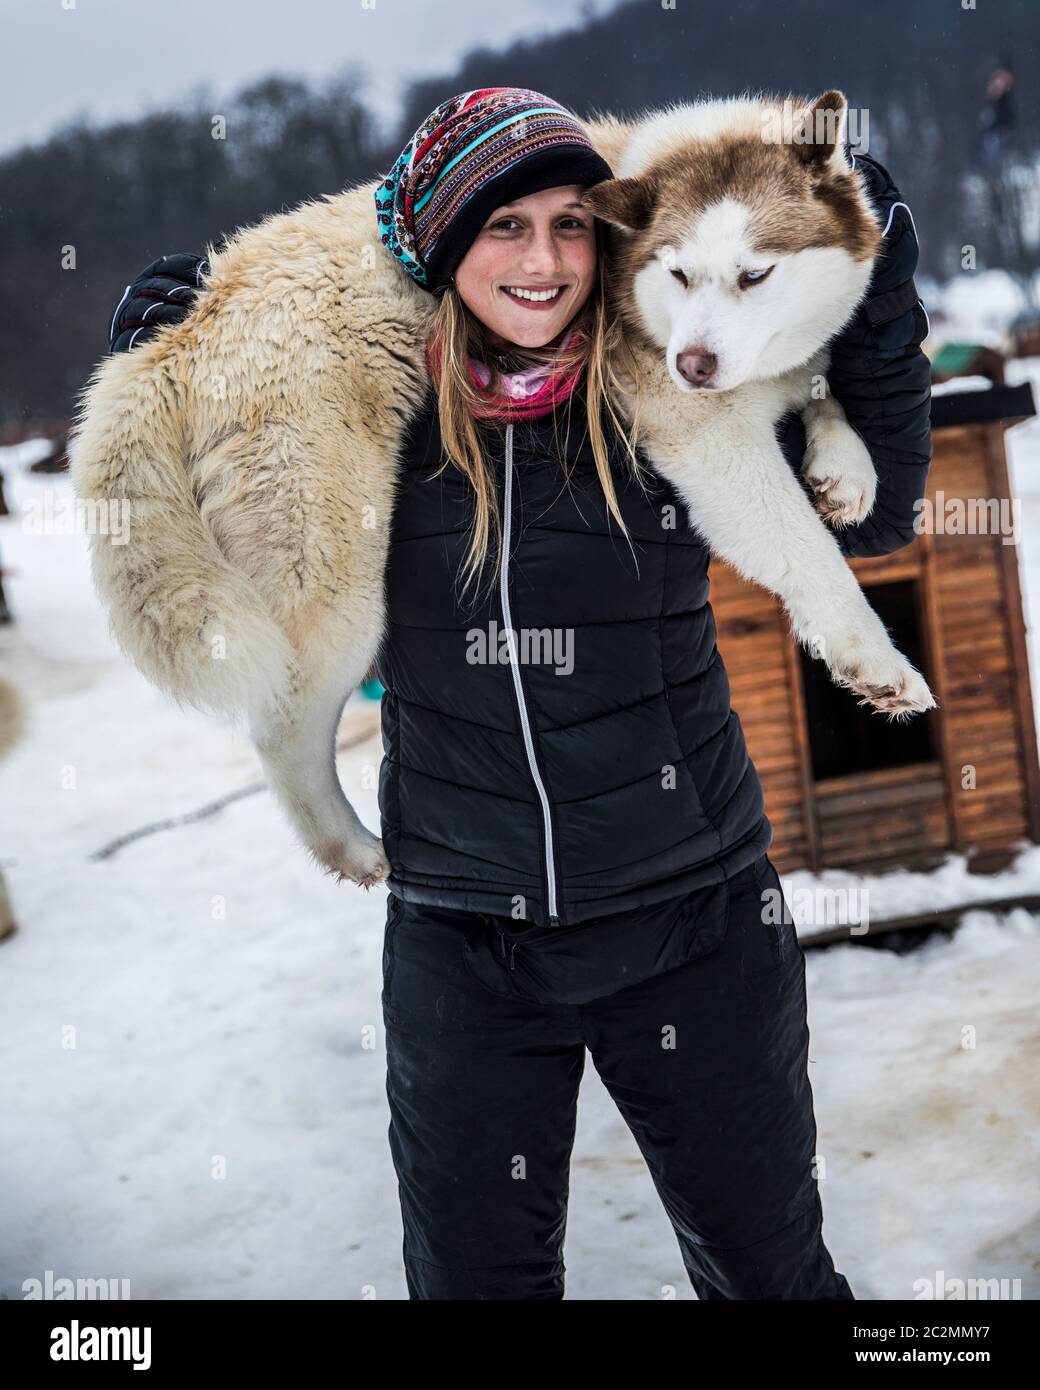 young woman in winter playing with a siberian dog Stock Photo